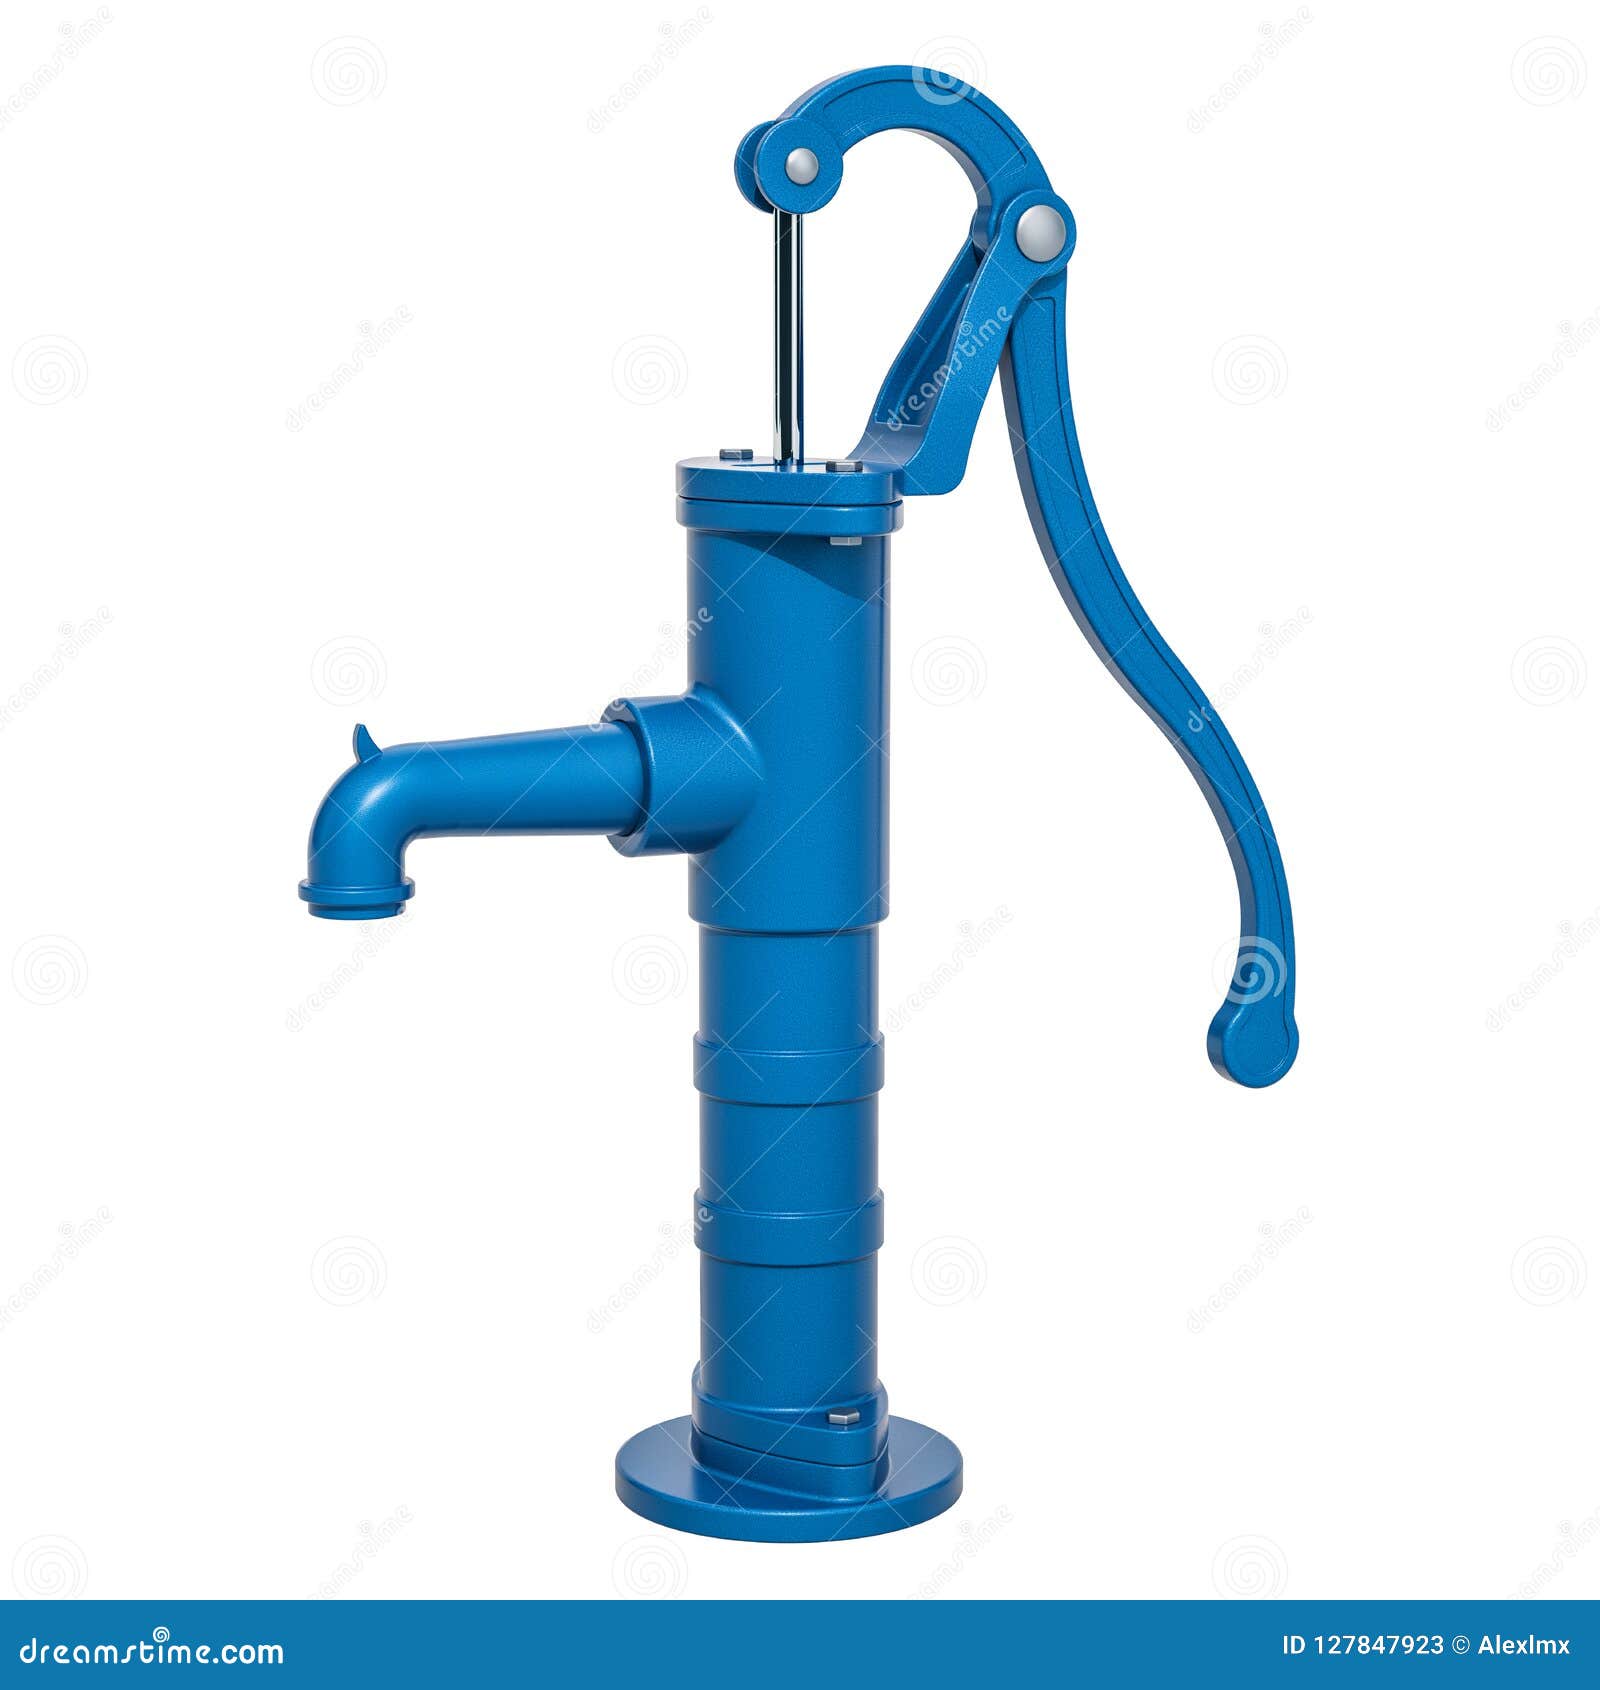 https://thumbs.dreamstime.com/z/hand-water-pump-d-rendering-isolated-white-background-127847923.jpg